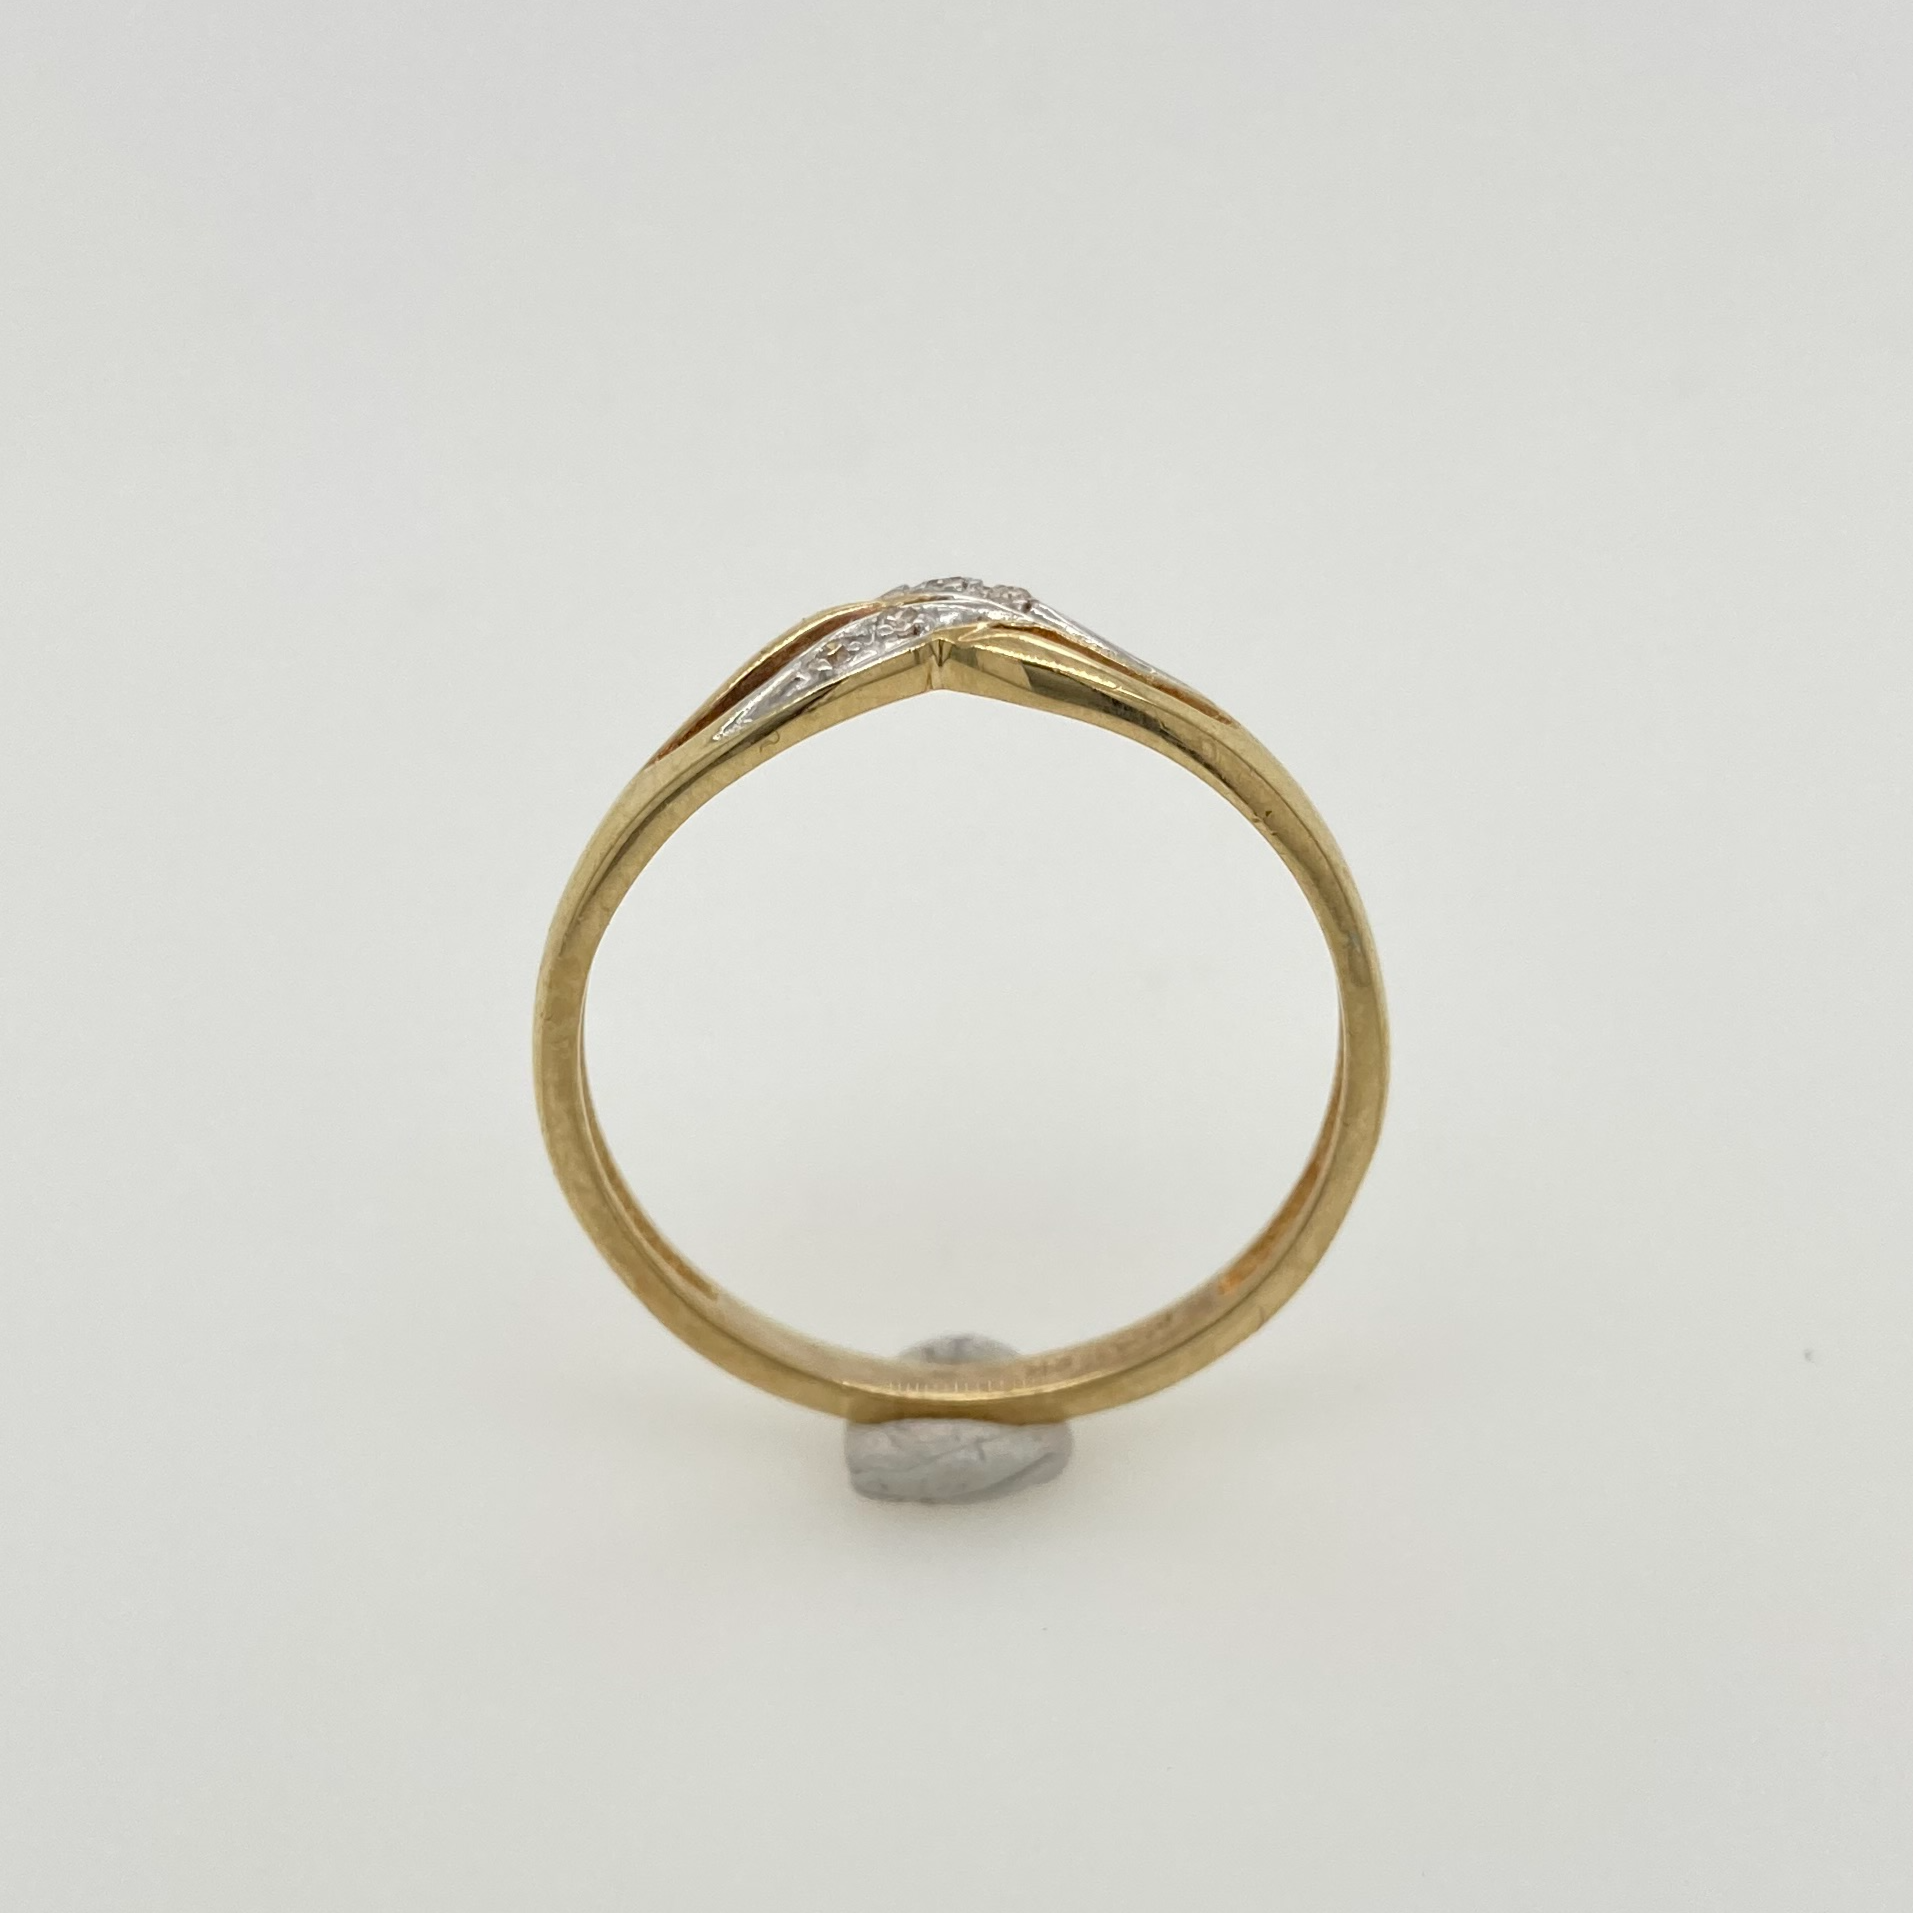 Woven Gold and Diamond Ring